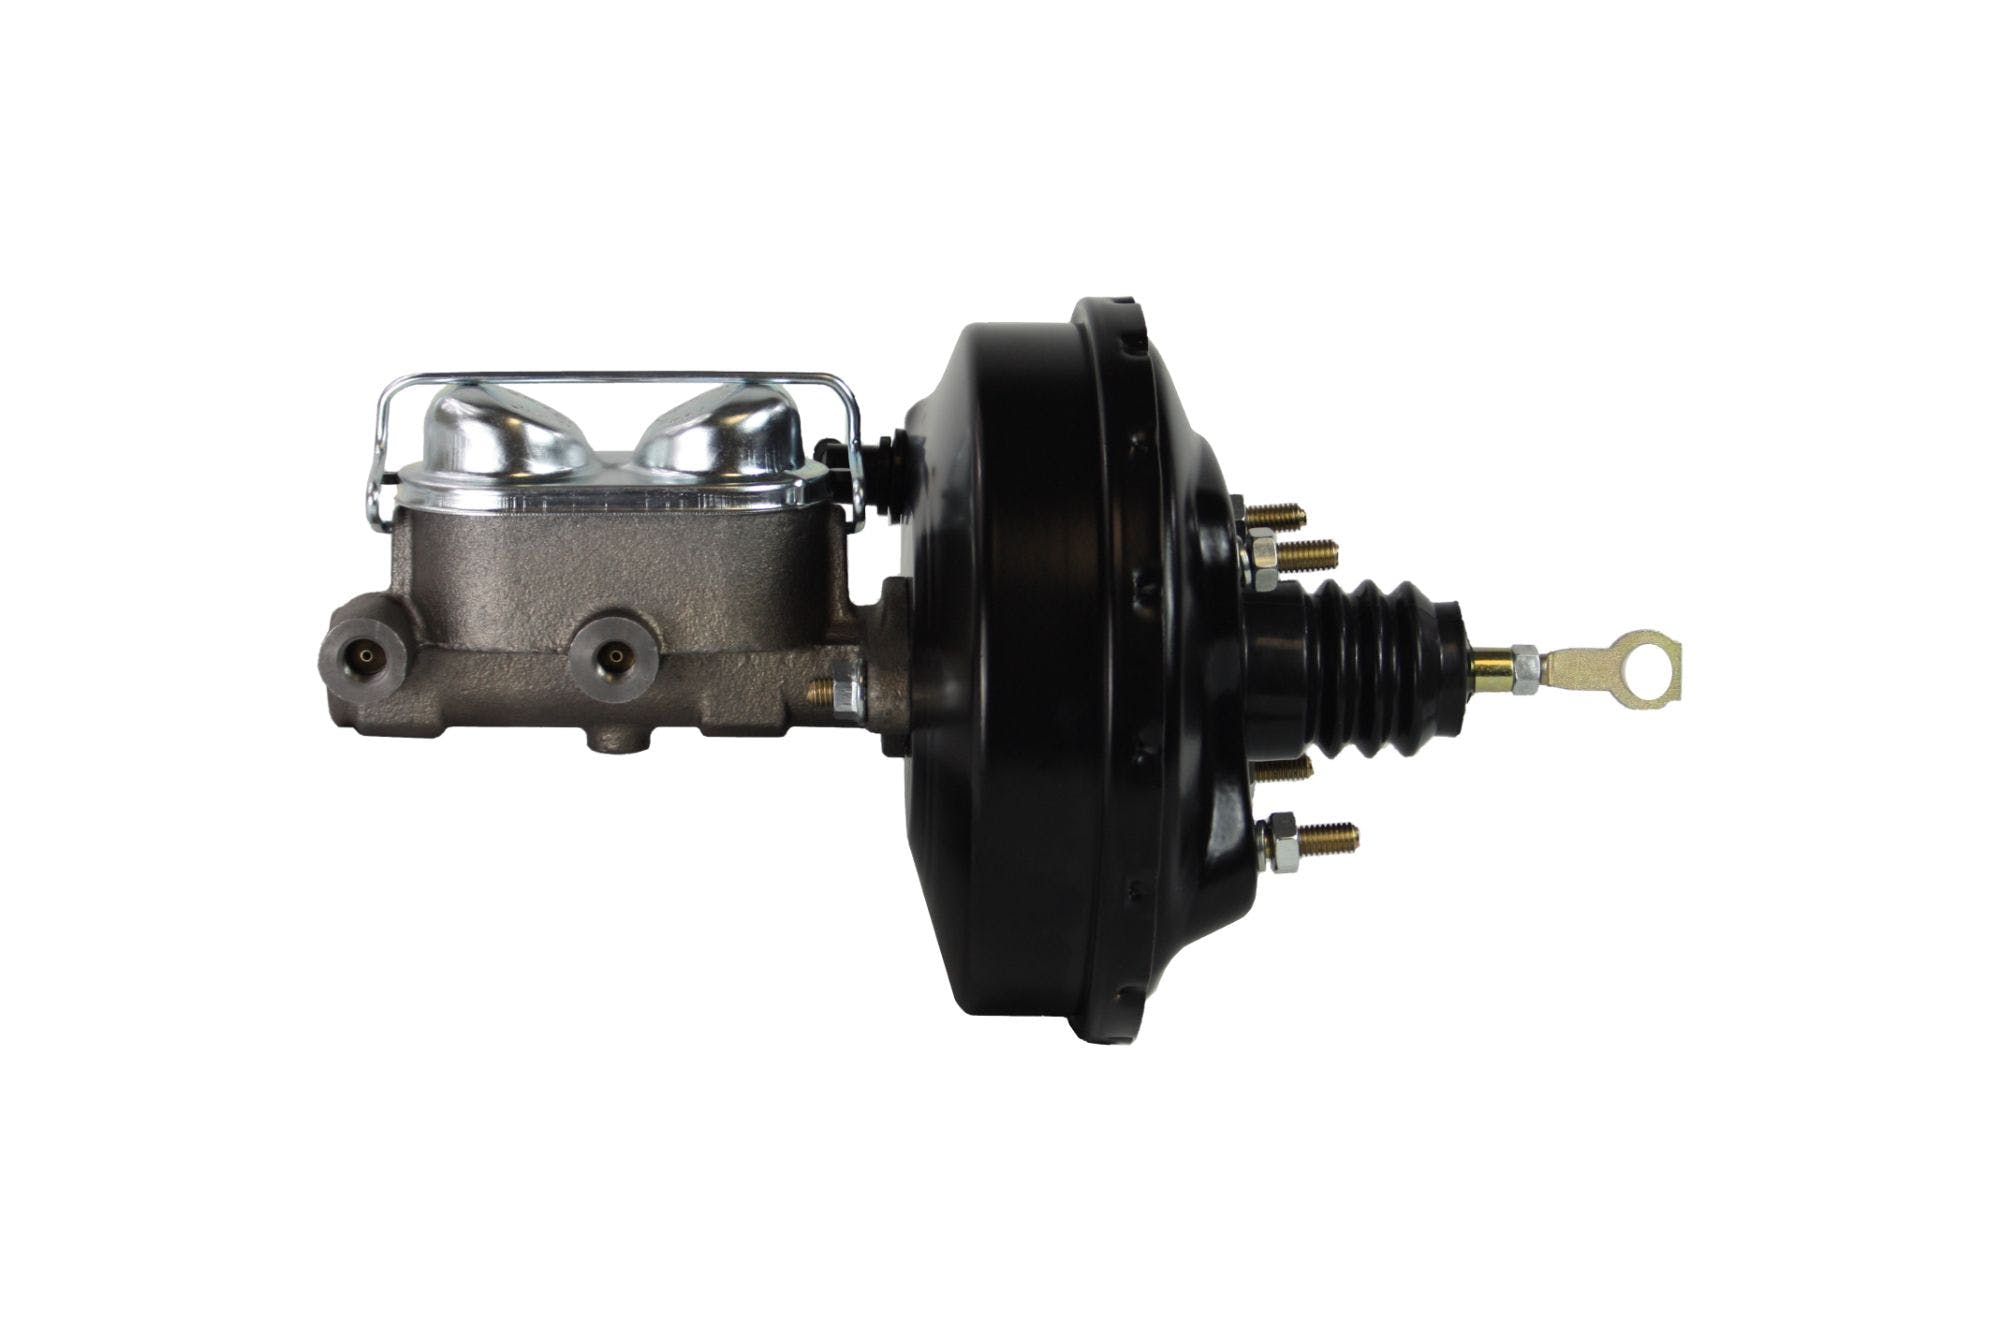 LEED Brakes FC0040HK Hydraulic Kit, Power Drum Brakes, 9 inch Black Booster Cast Iron Master Cylinder